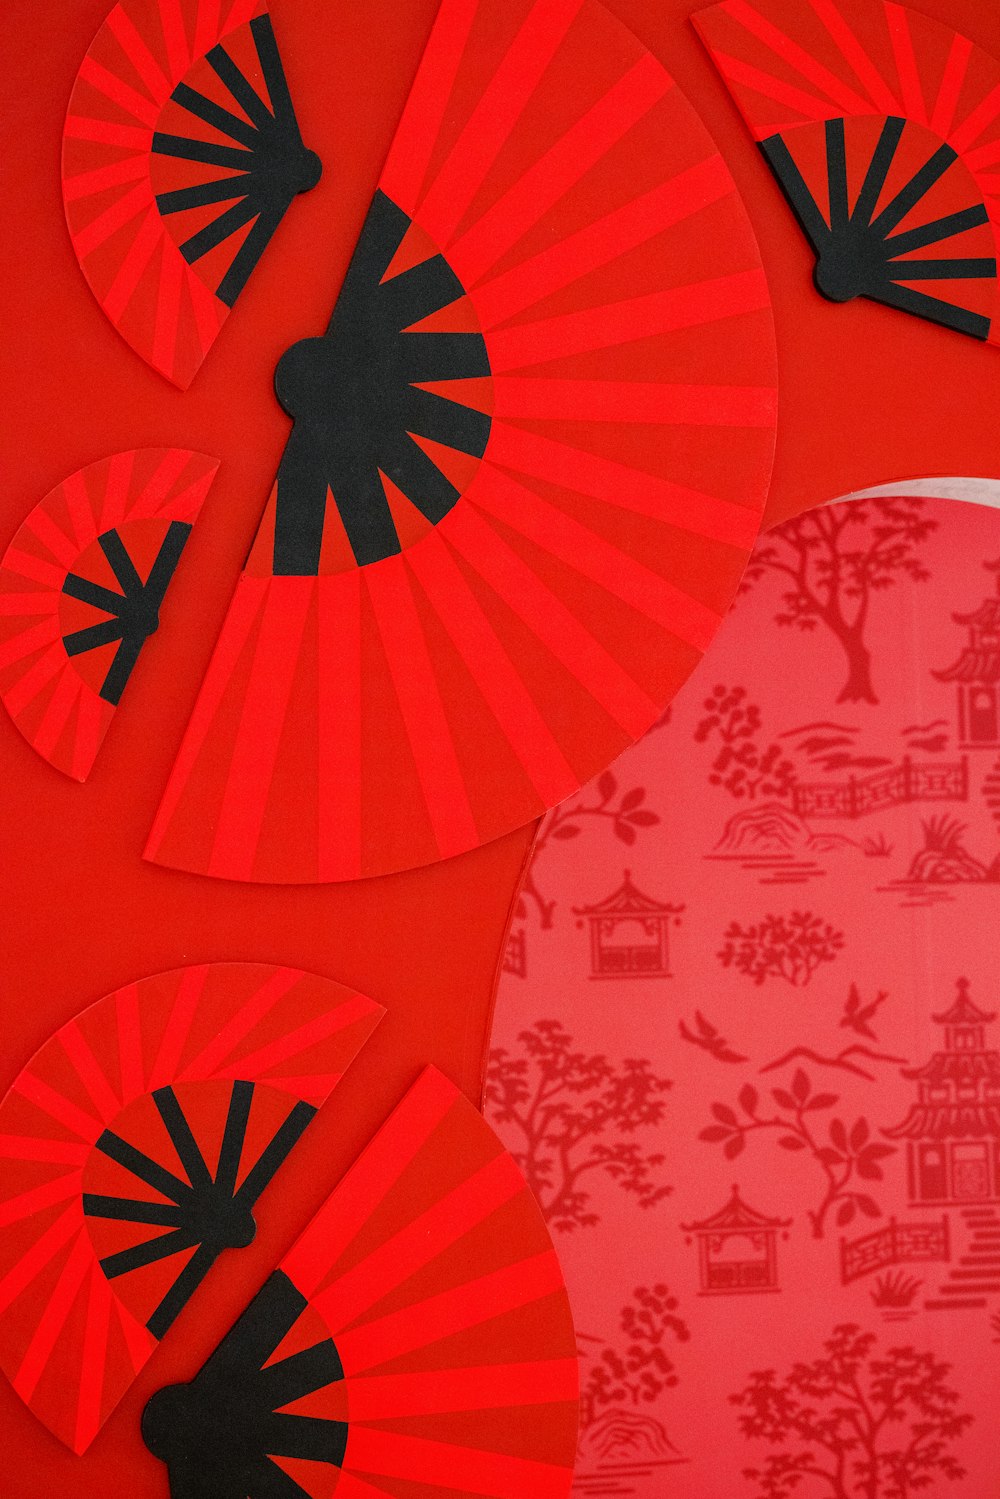 a close up of a paper fan on a red background